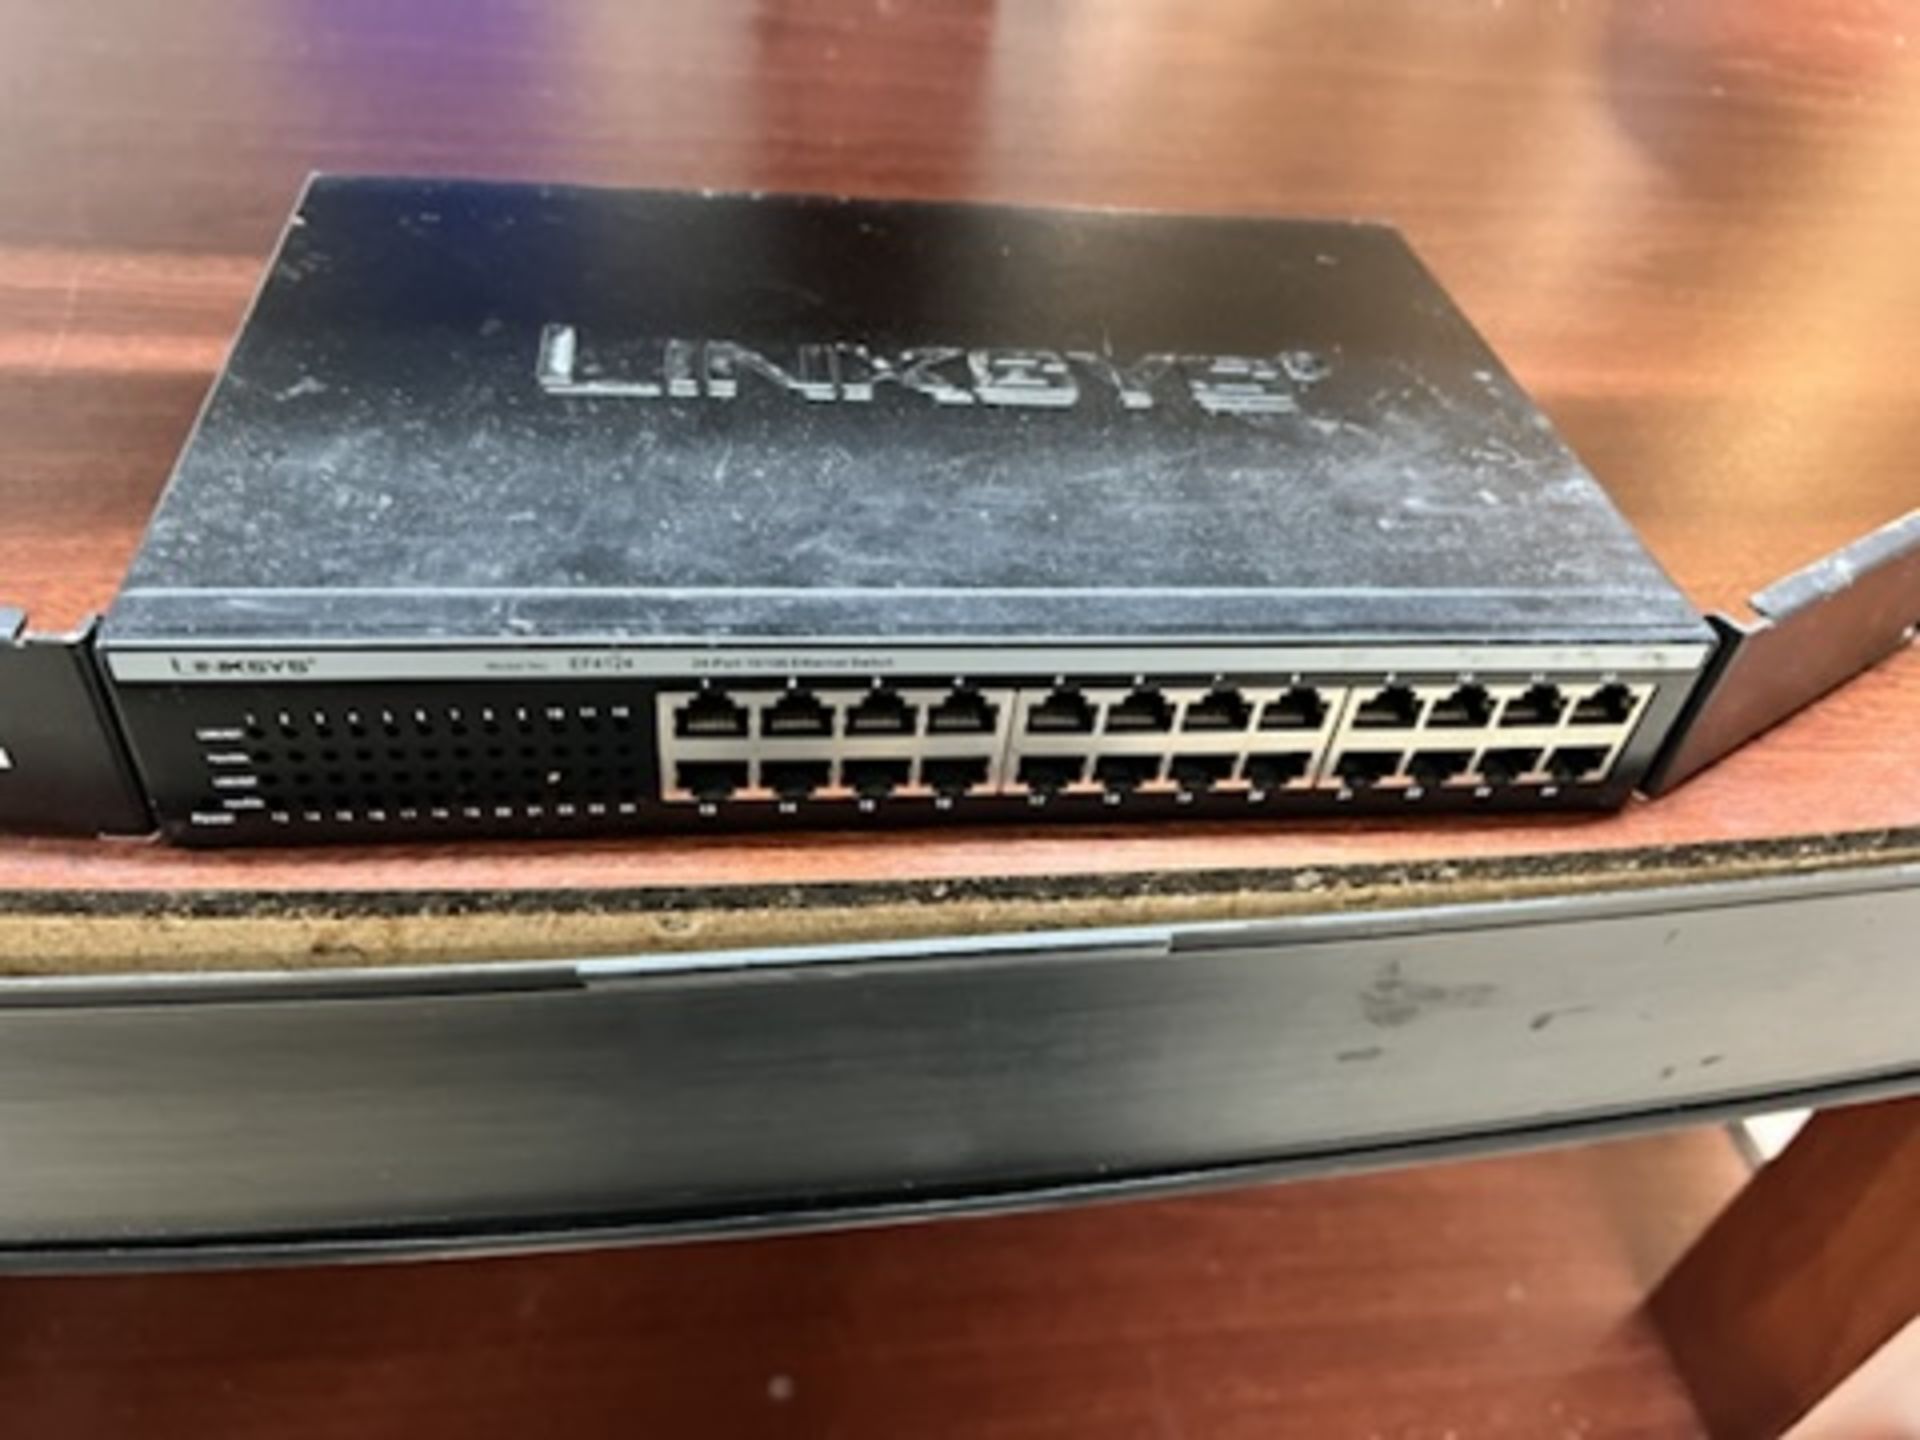 Lot of: (2) Cisco 2500 series routers , (1) Cisco IAD 2400 Series router, (2) Linksys 24-port intern - Image 17 of 18